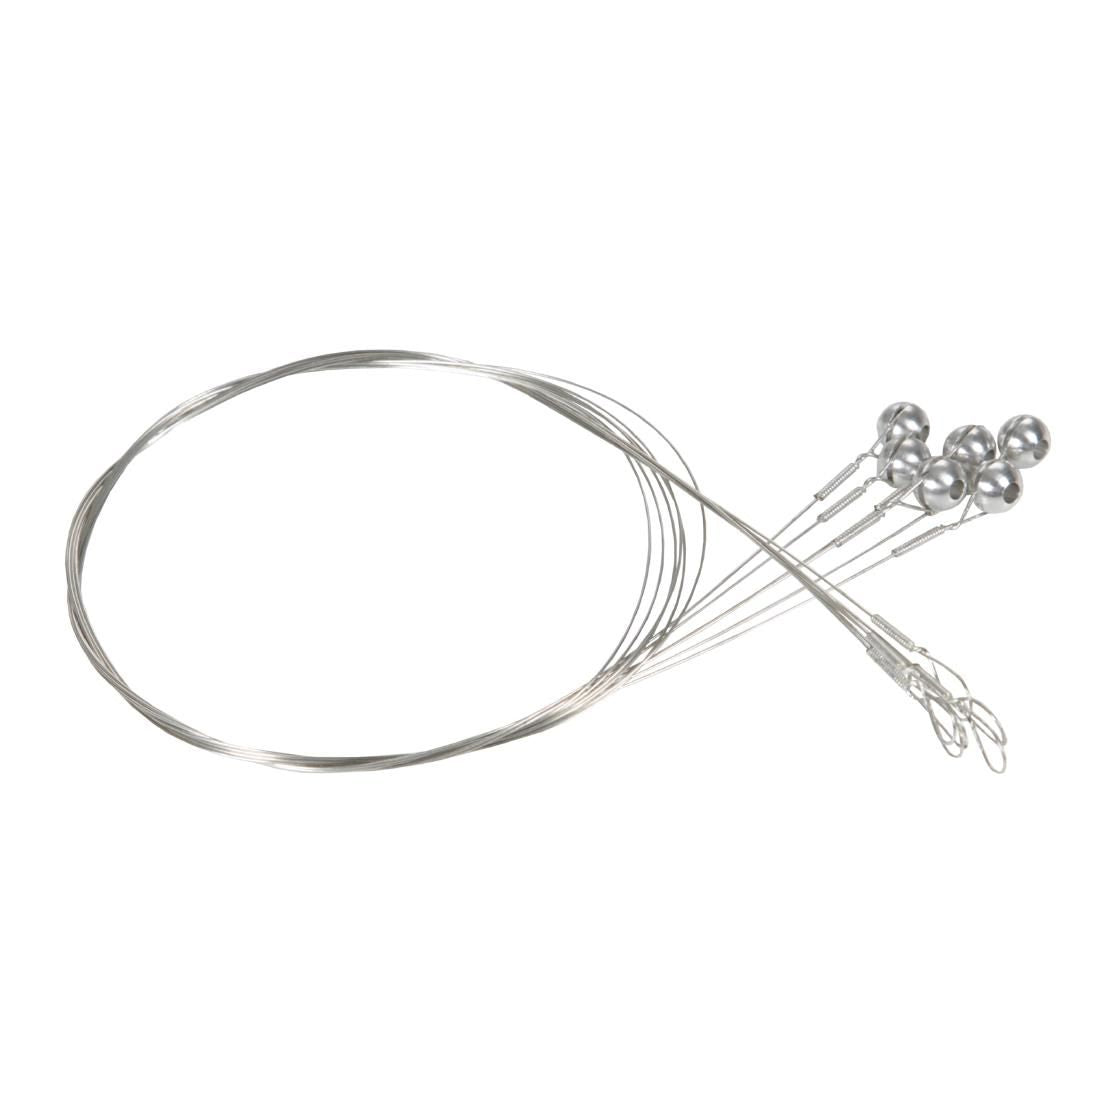 CL069 Spare Wires for Cheese Slicing Board (Pack of 6) JD Catering Equipment Solutions Ltd